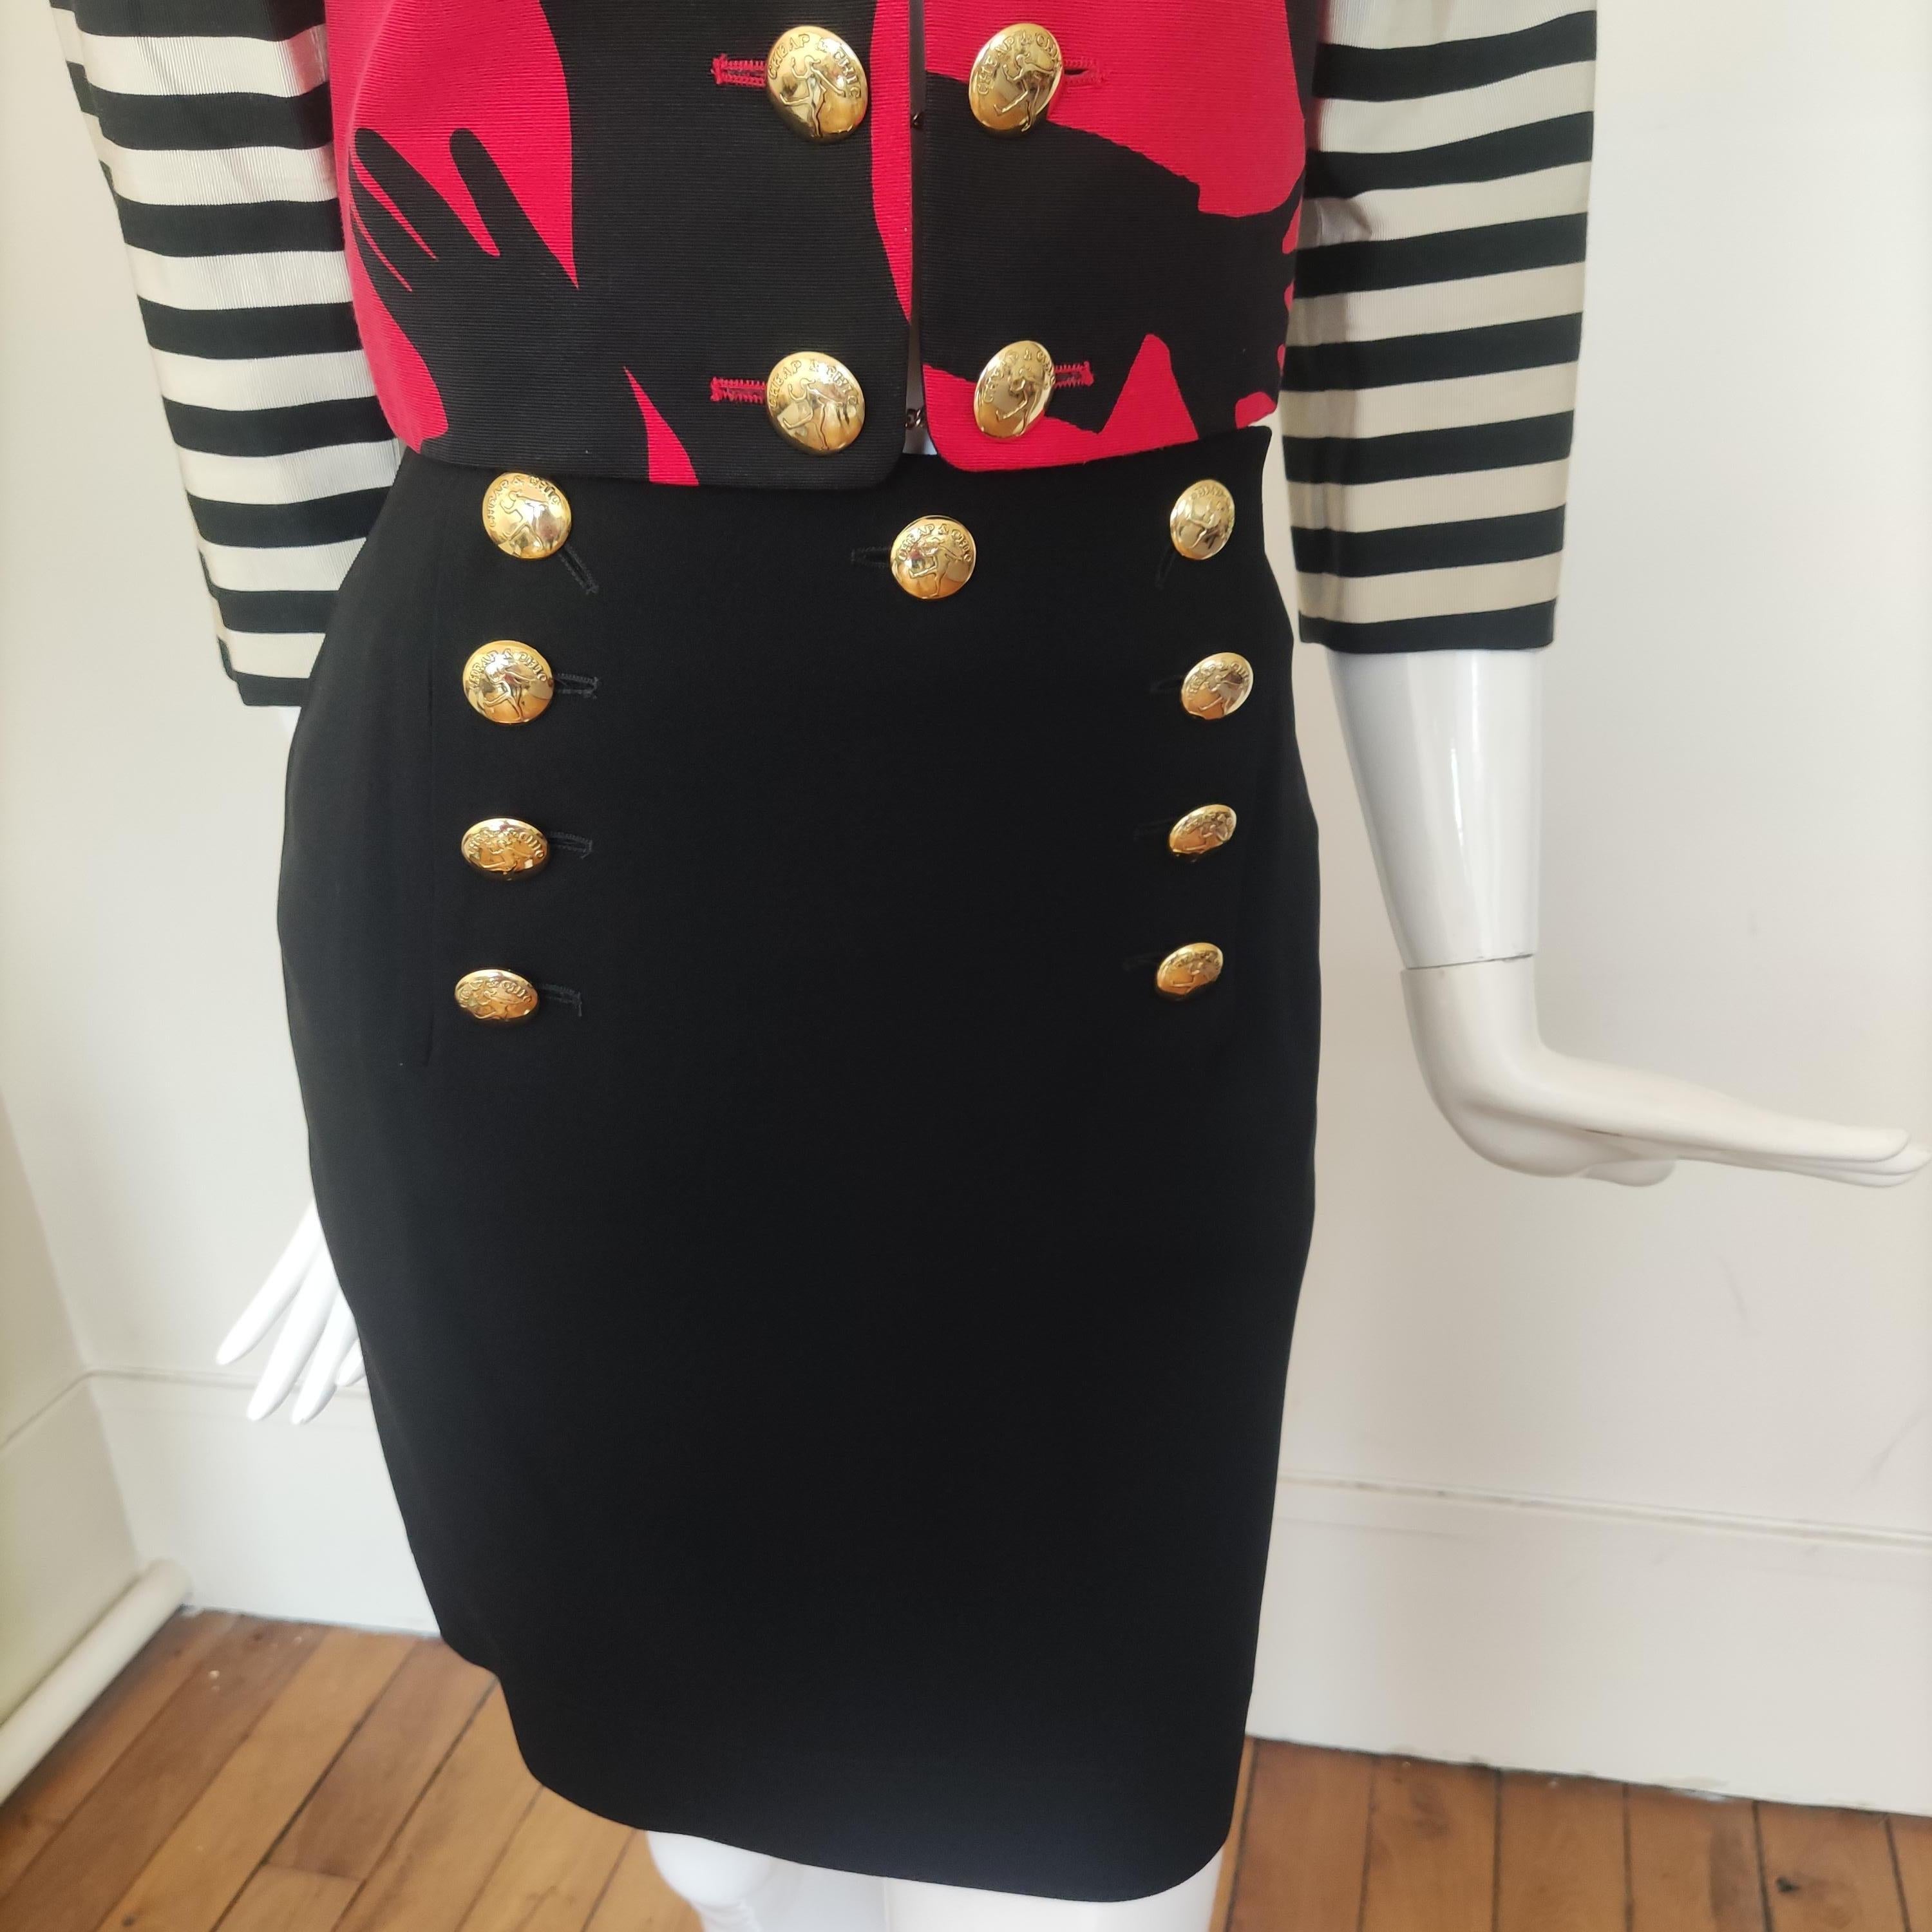 Moschino Cheap and Chic Olive Oyl Popeye Arms Legs Shadow The Nanny Couture Suit For Sale 8